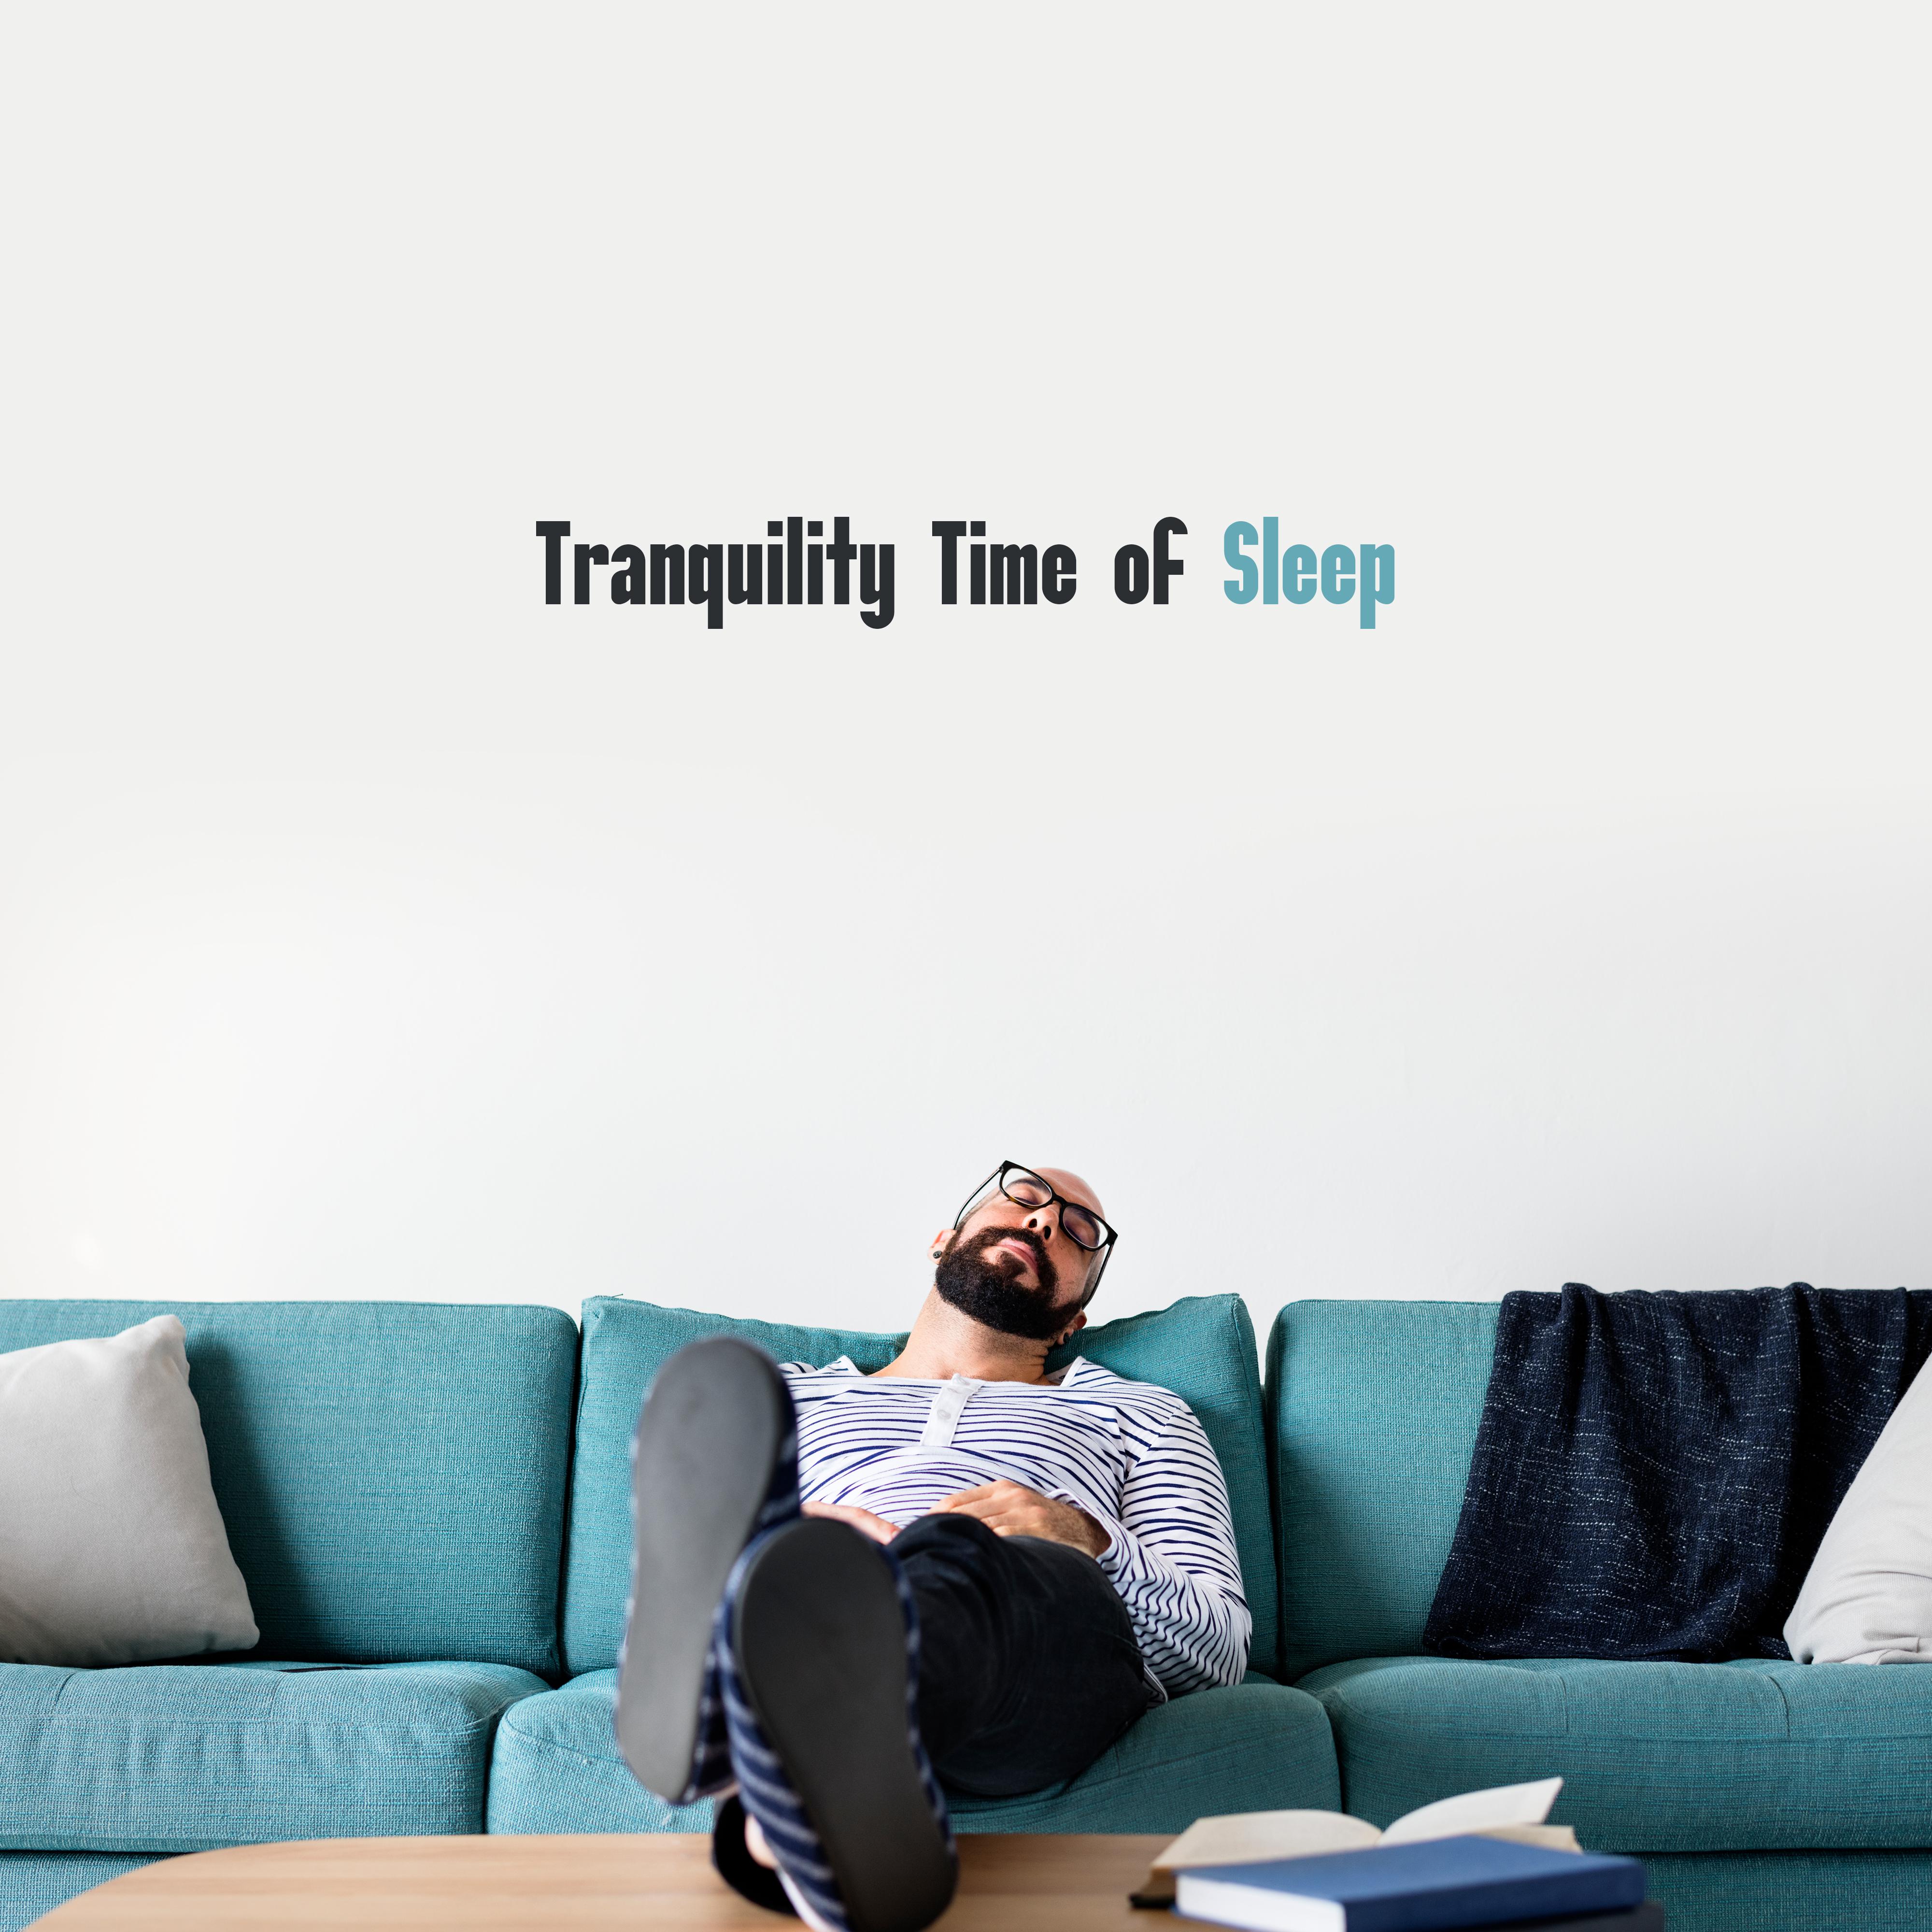 Tranquility Time of Sleep: 2019 New Age Soft Music Selection for Total Calm Down & Rest, Sounds Perfect for Afternoon Nap & All Night Long Sleep